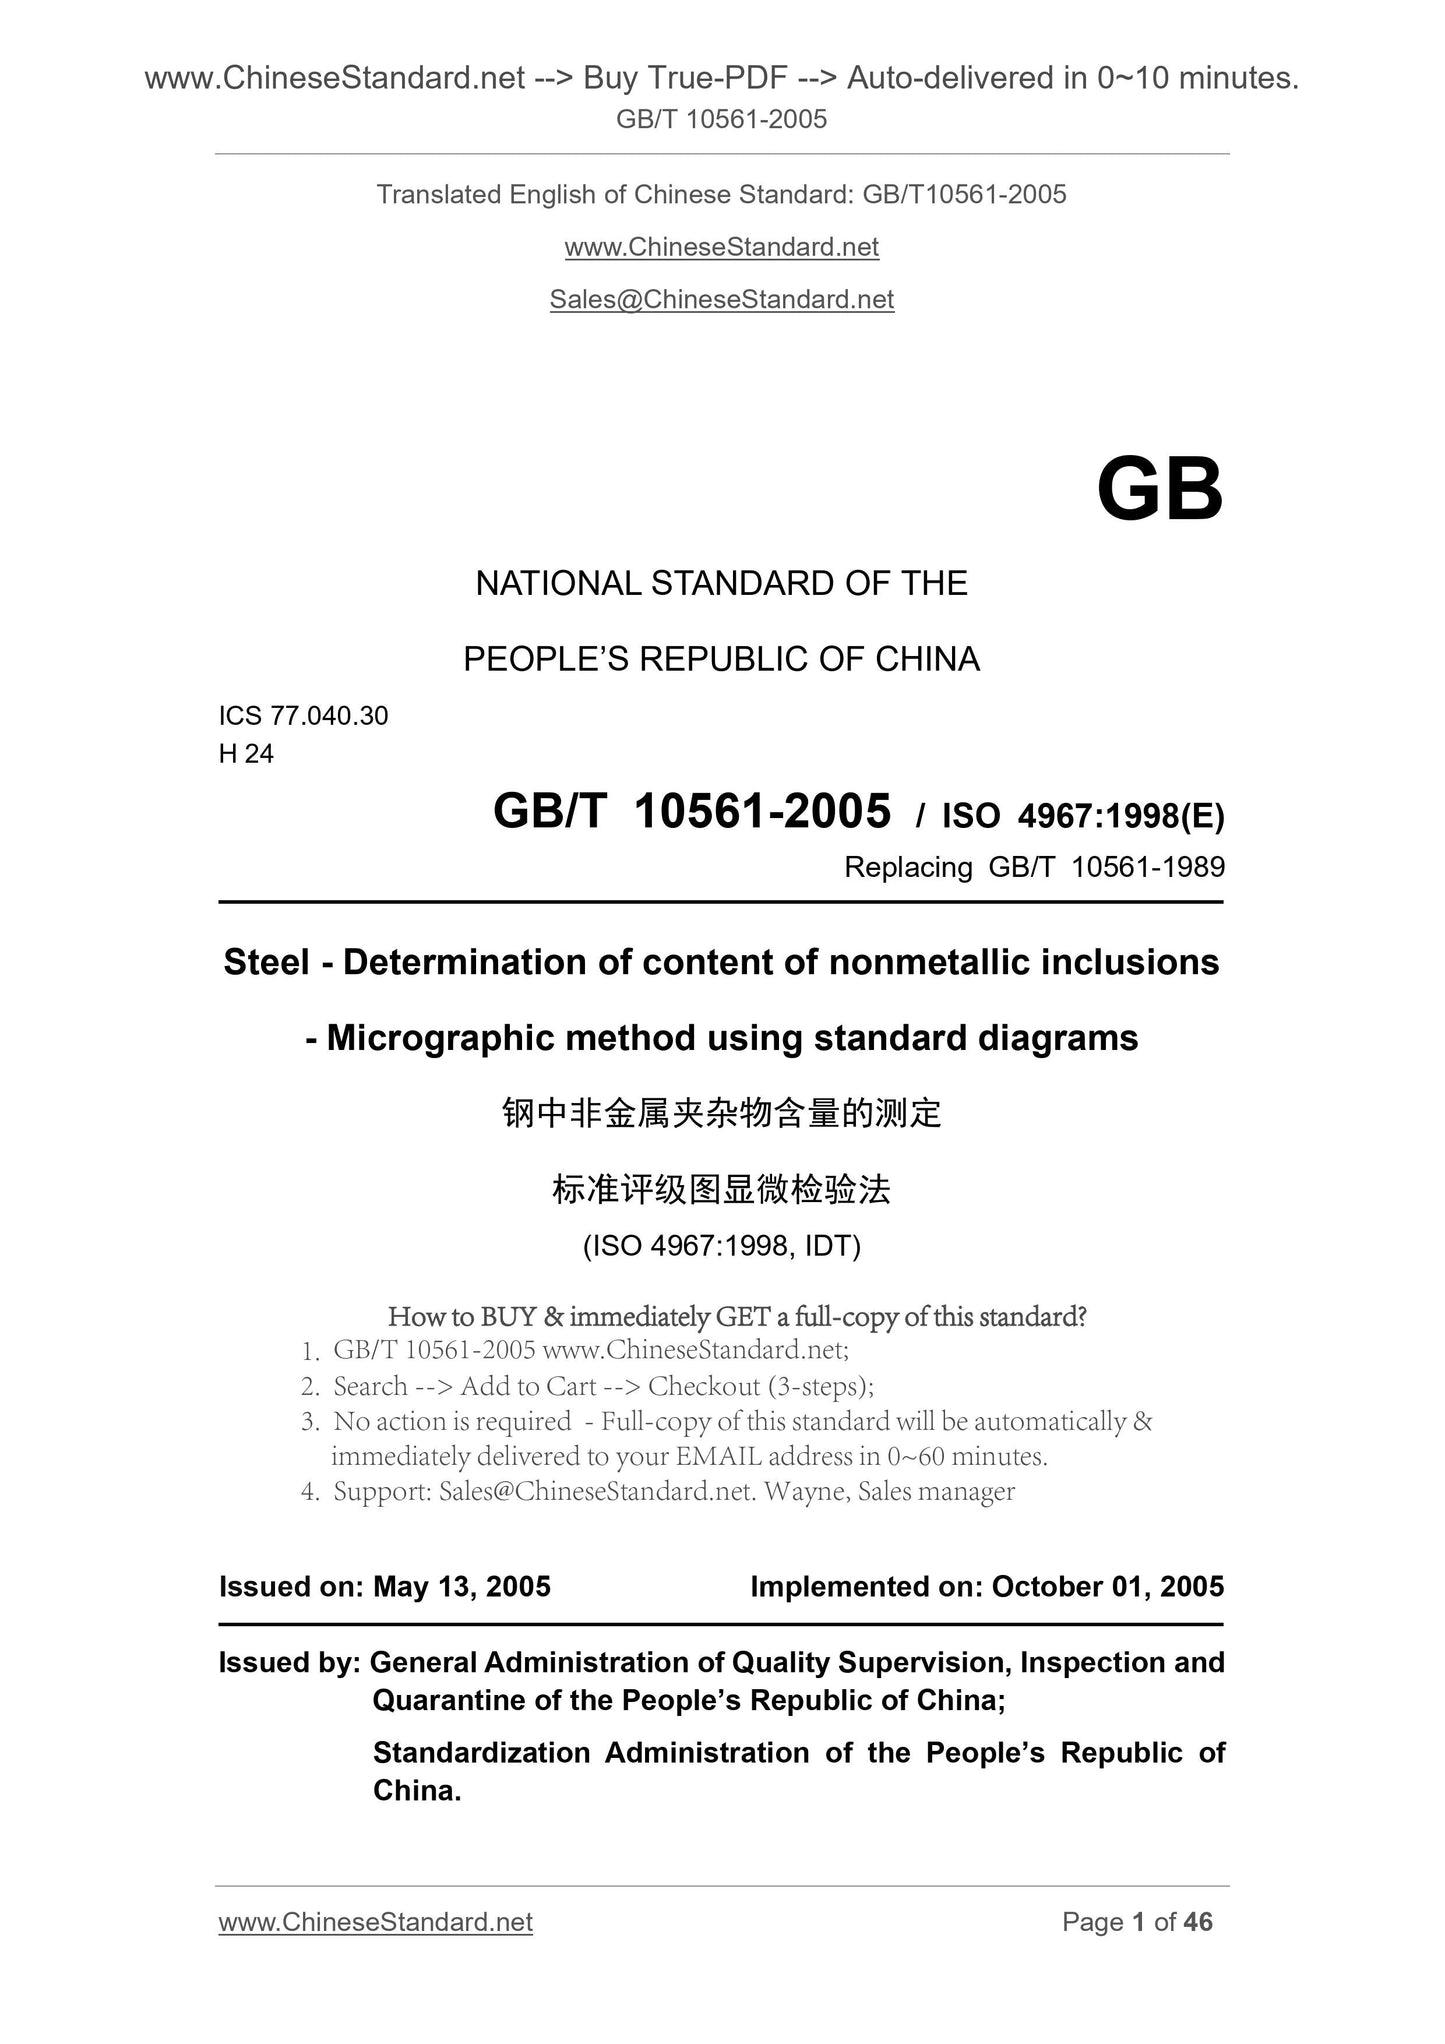 GB/T 10561-2005 Page 1